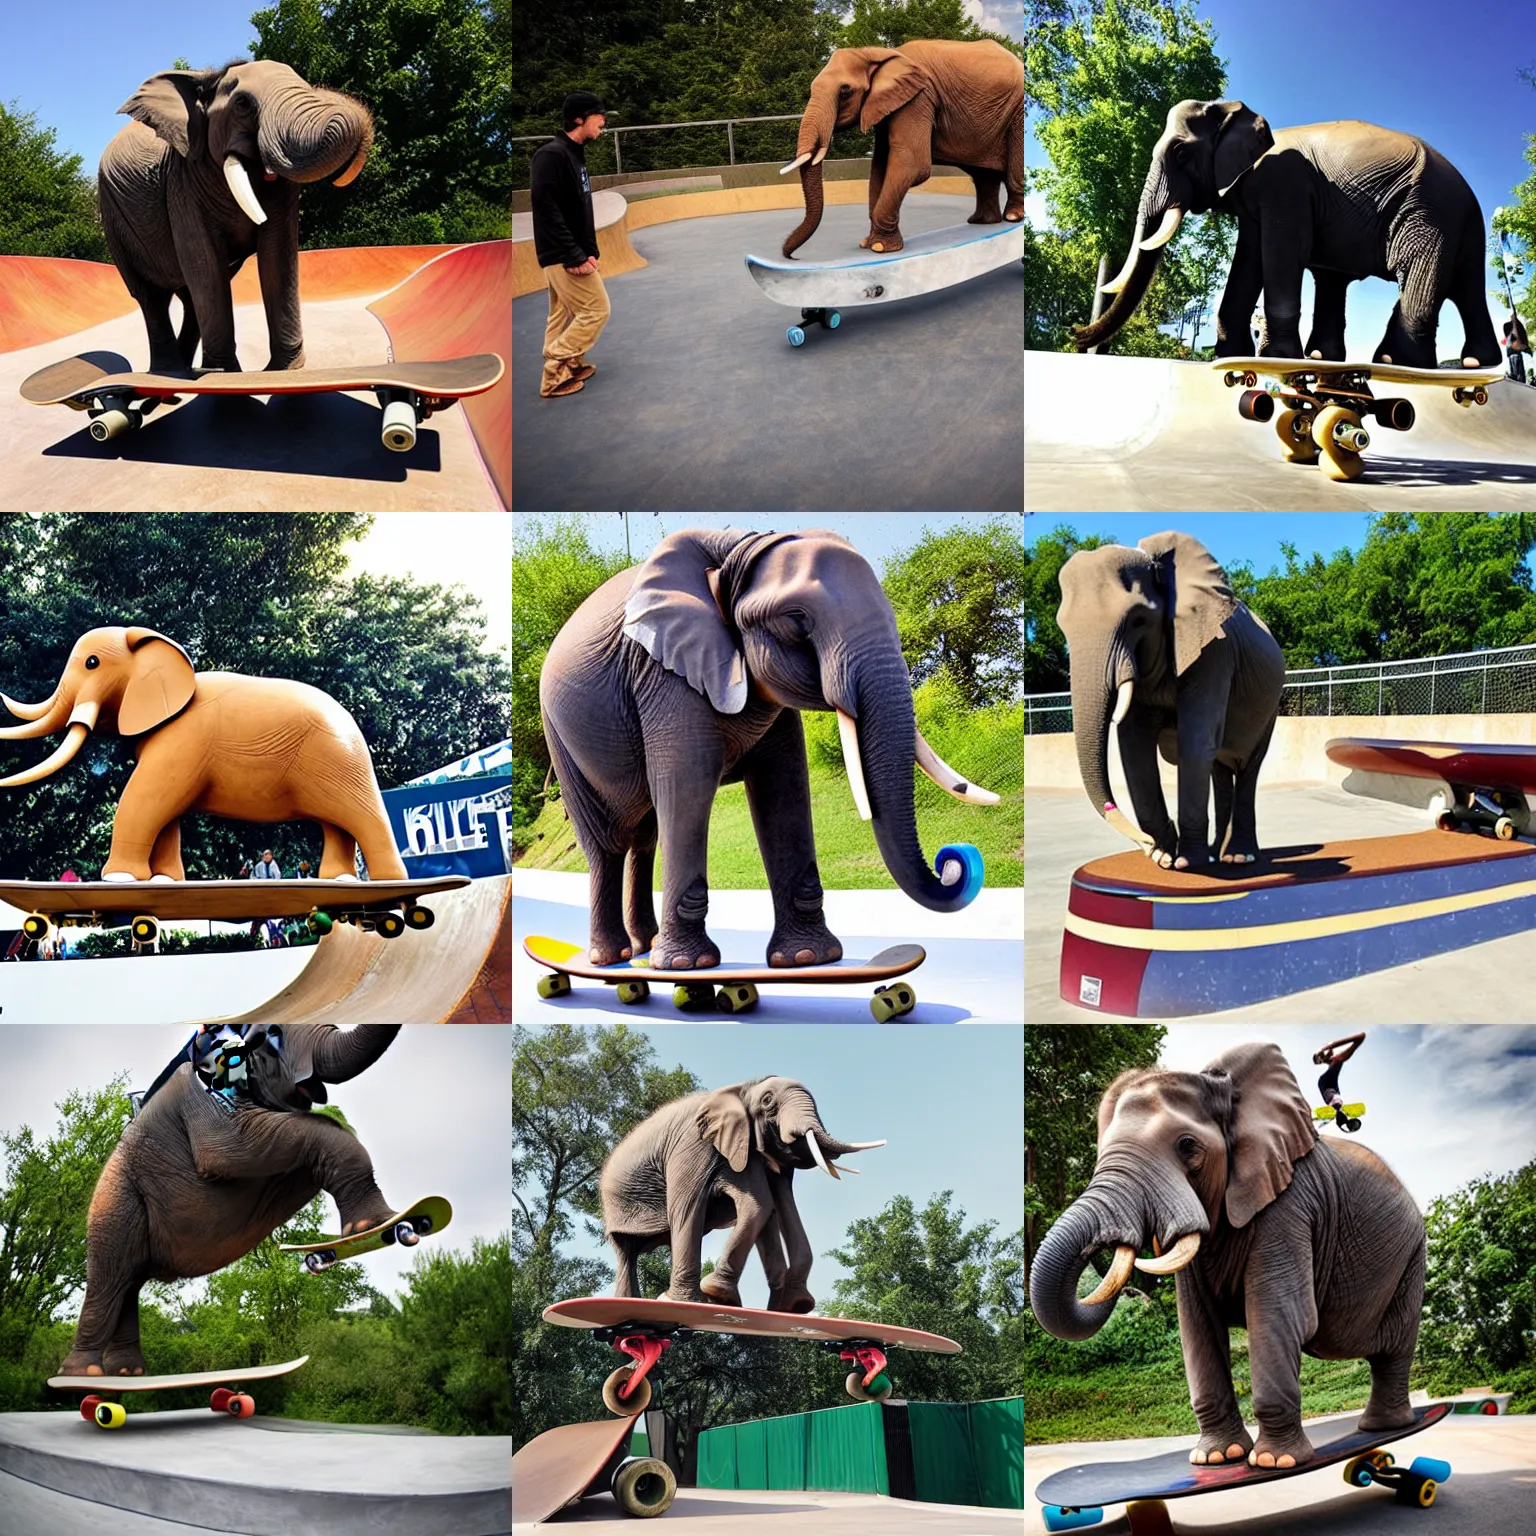 Prompt: an professional elephant skateboarder on a half pipe on a skateboard